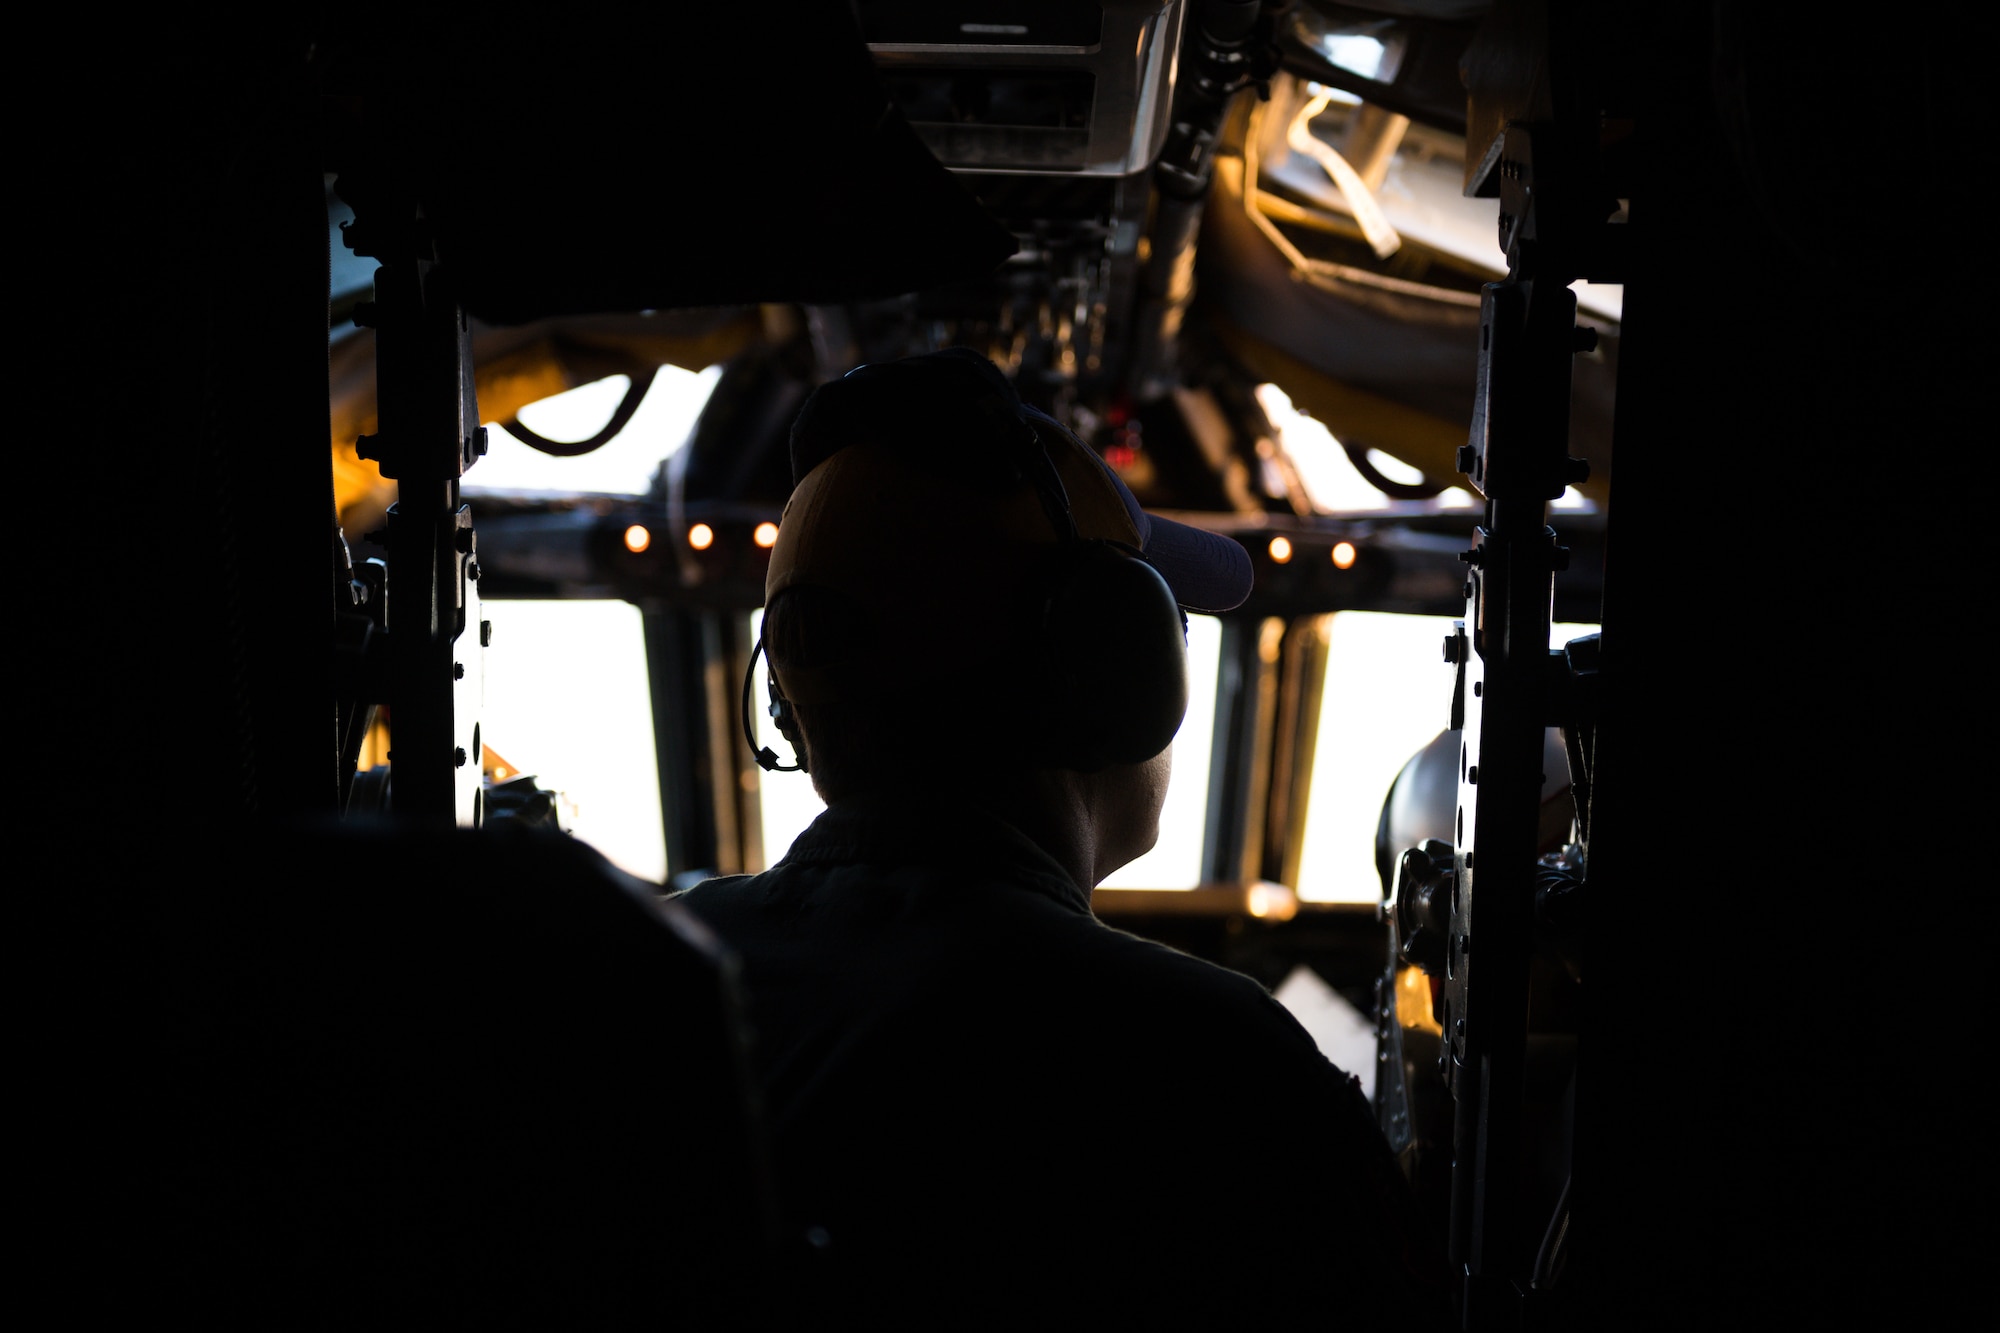 Silhouette of Airman in cockpit of B-52